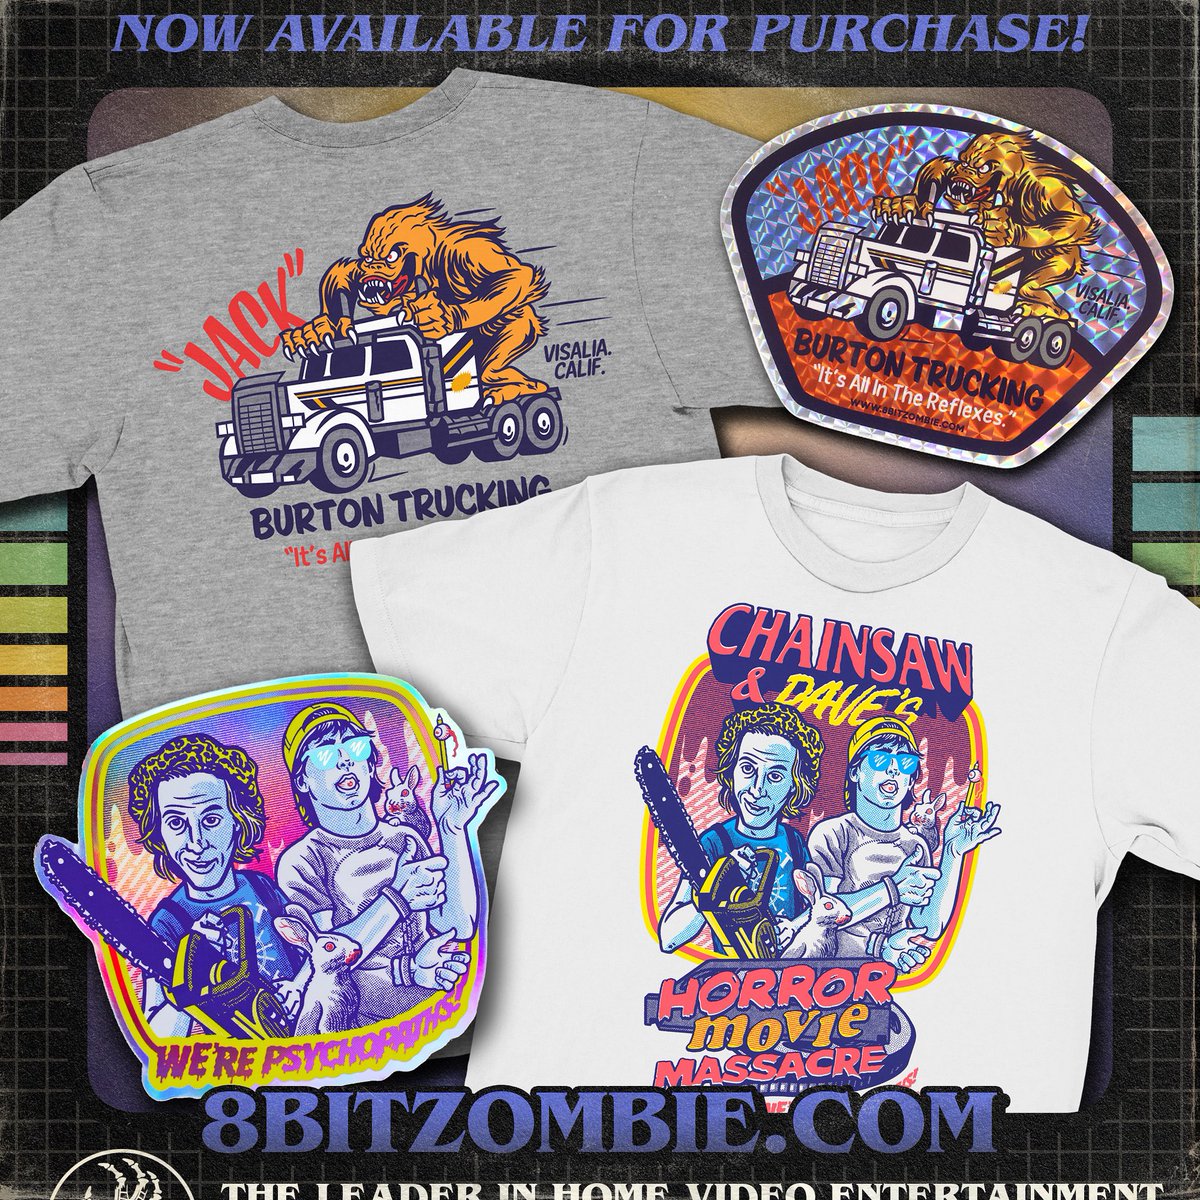 One more heads up, just in case you missed it: “Burton Trucking” is finally back in stock and the all new “Psychos” tee is now available! 8BITZOMBIE.COM